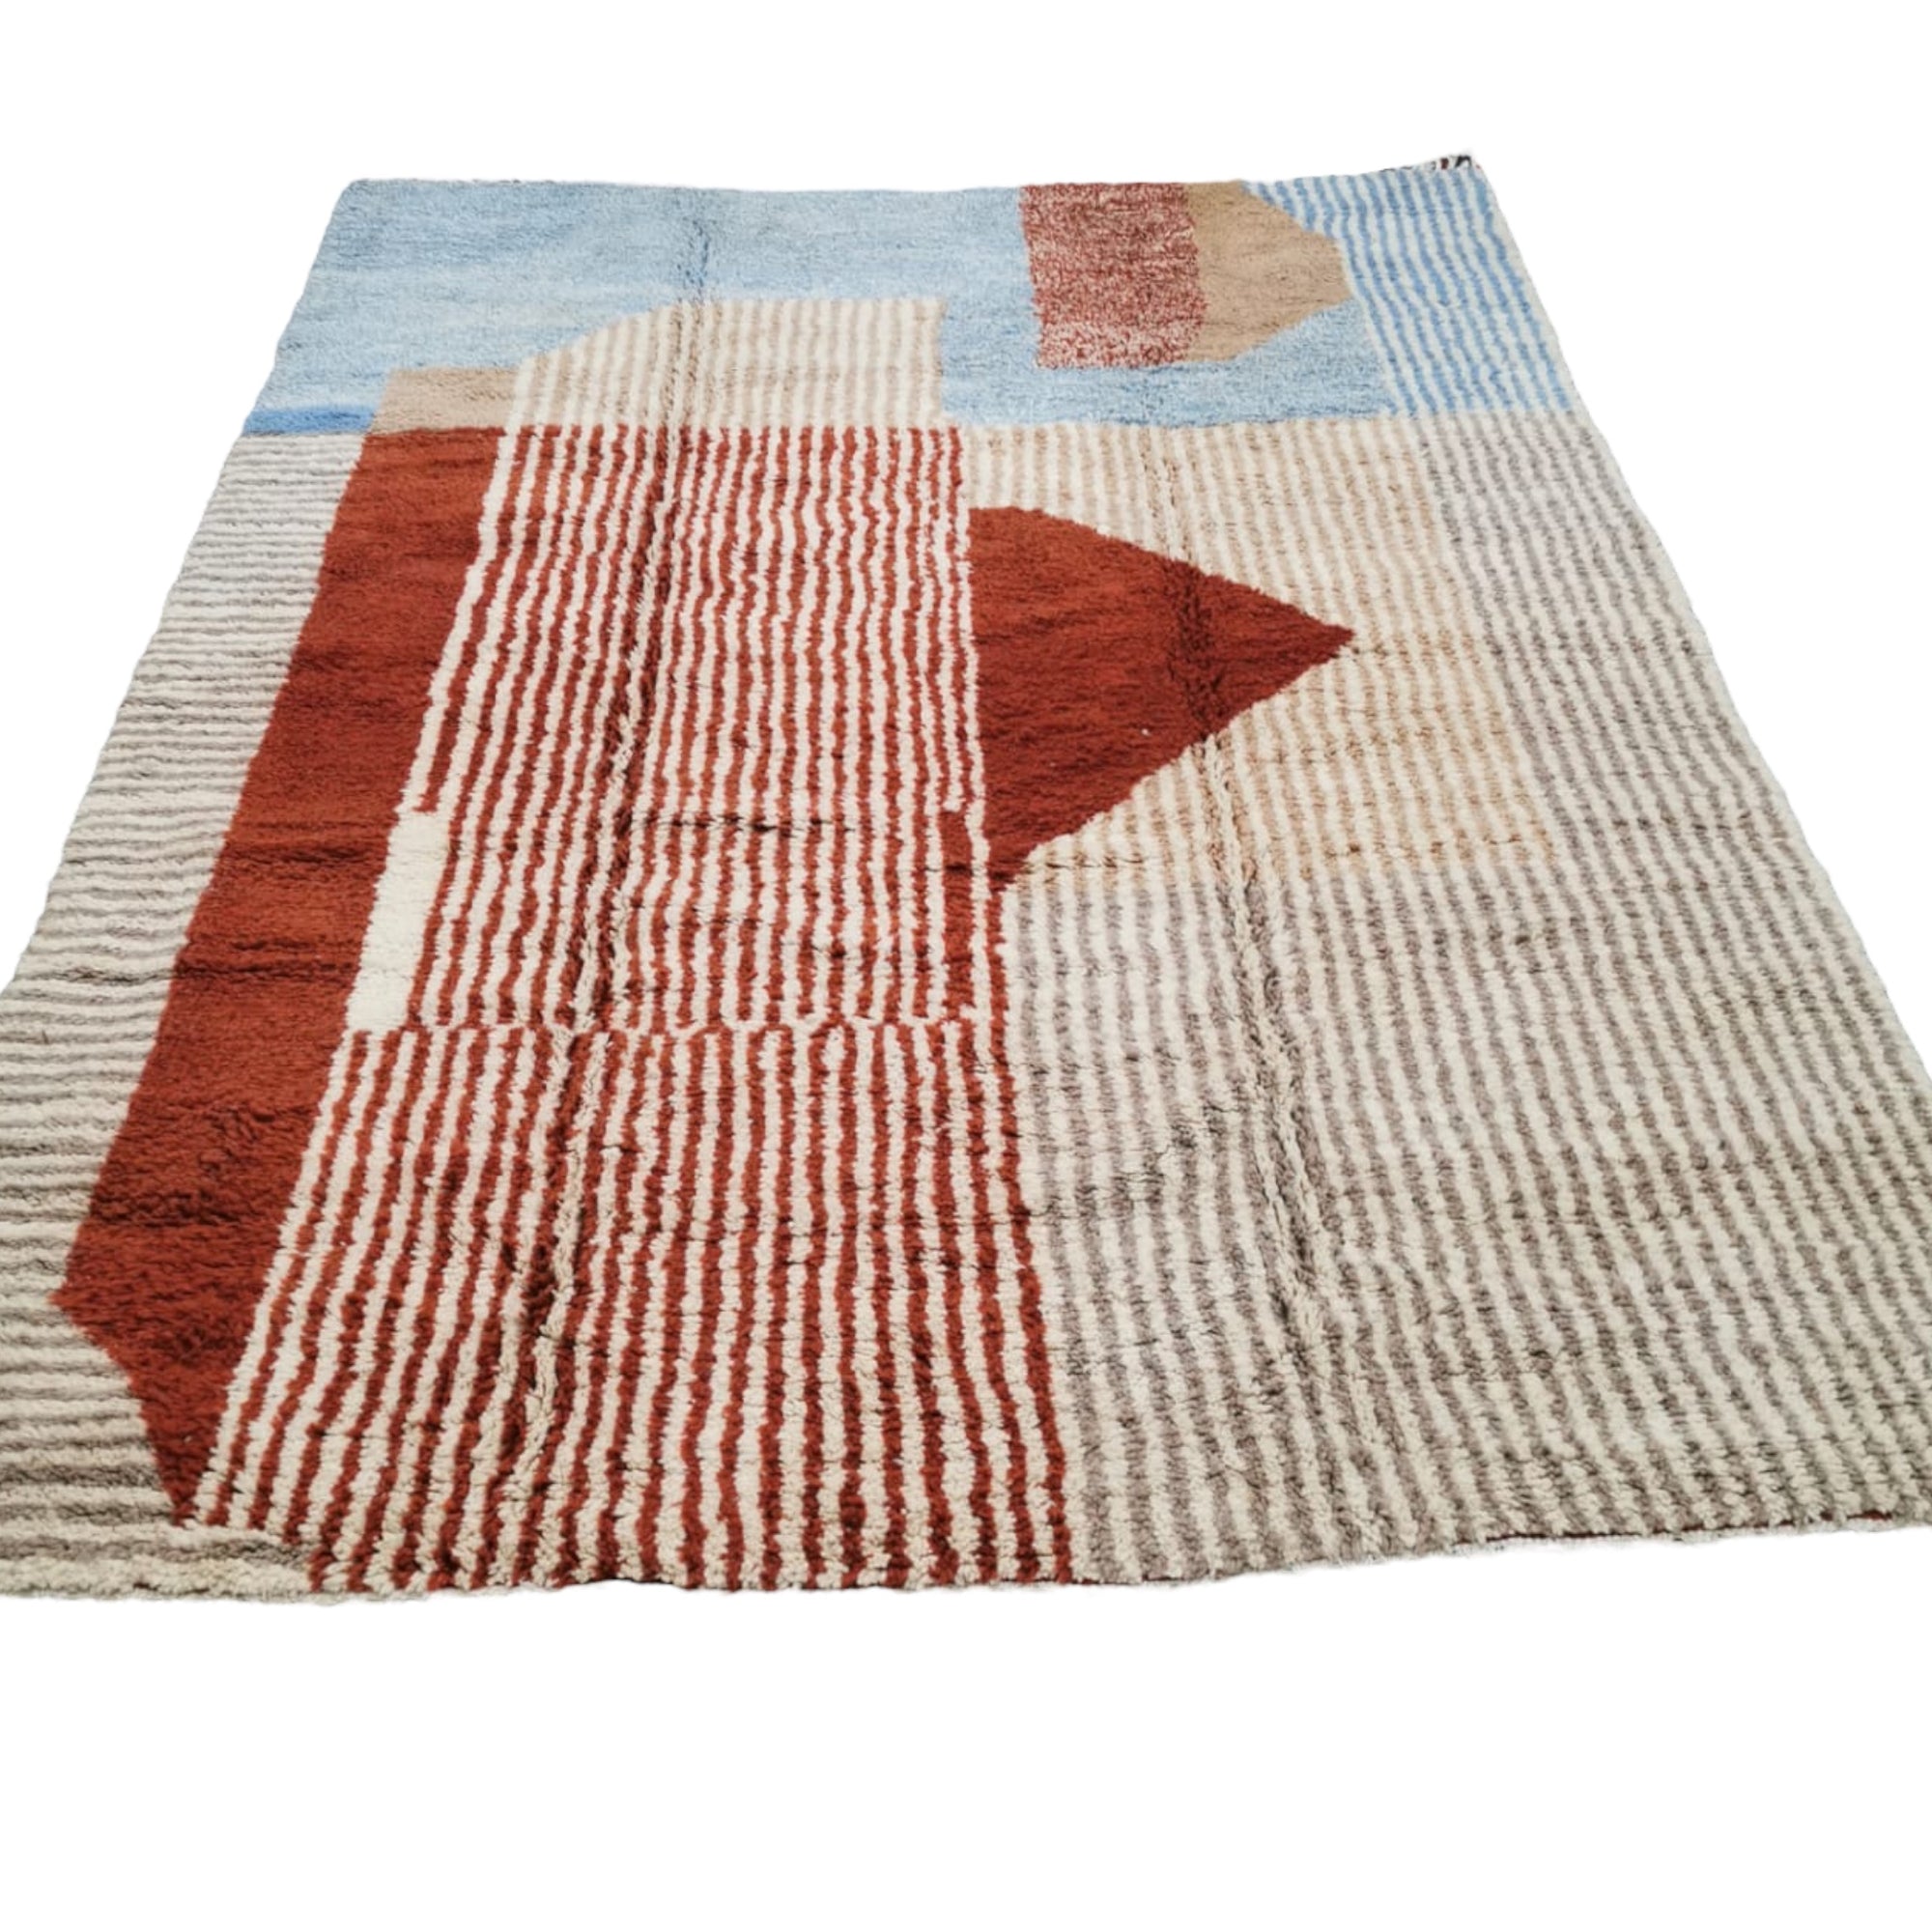 Mojave Rug  - Knotted Weave